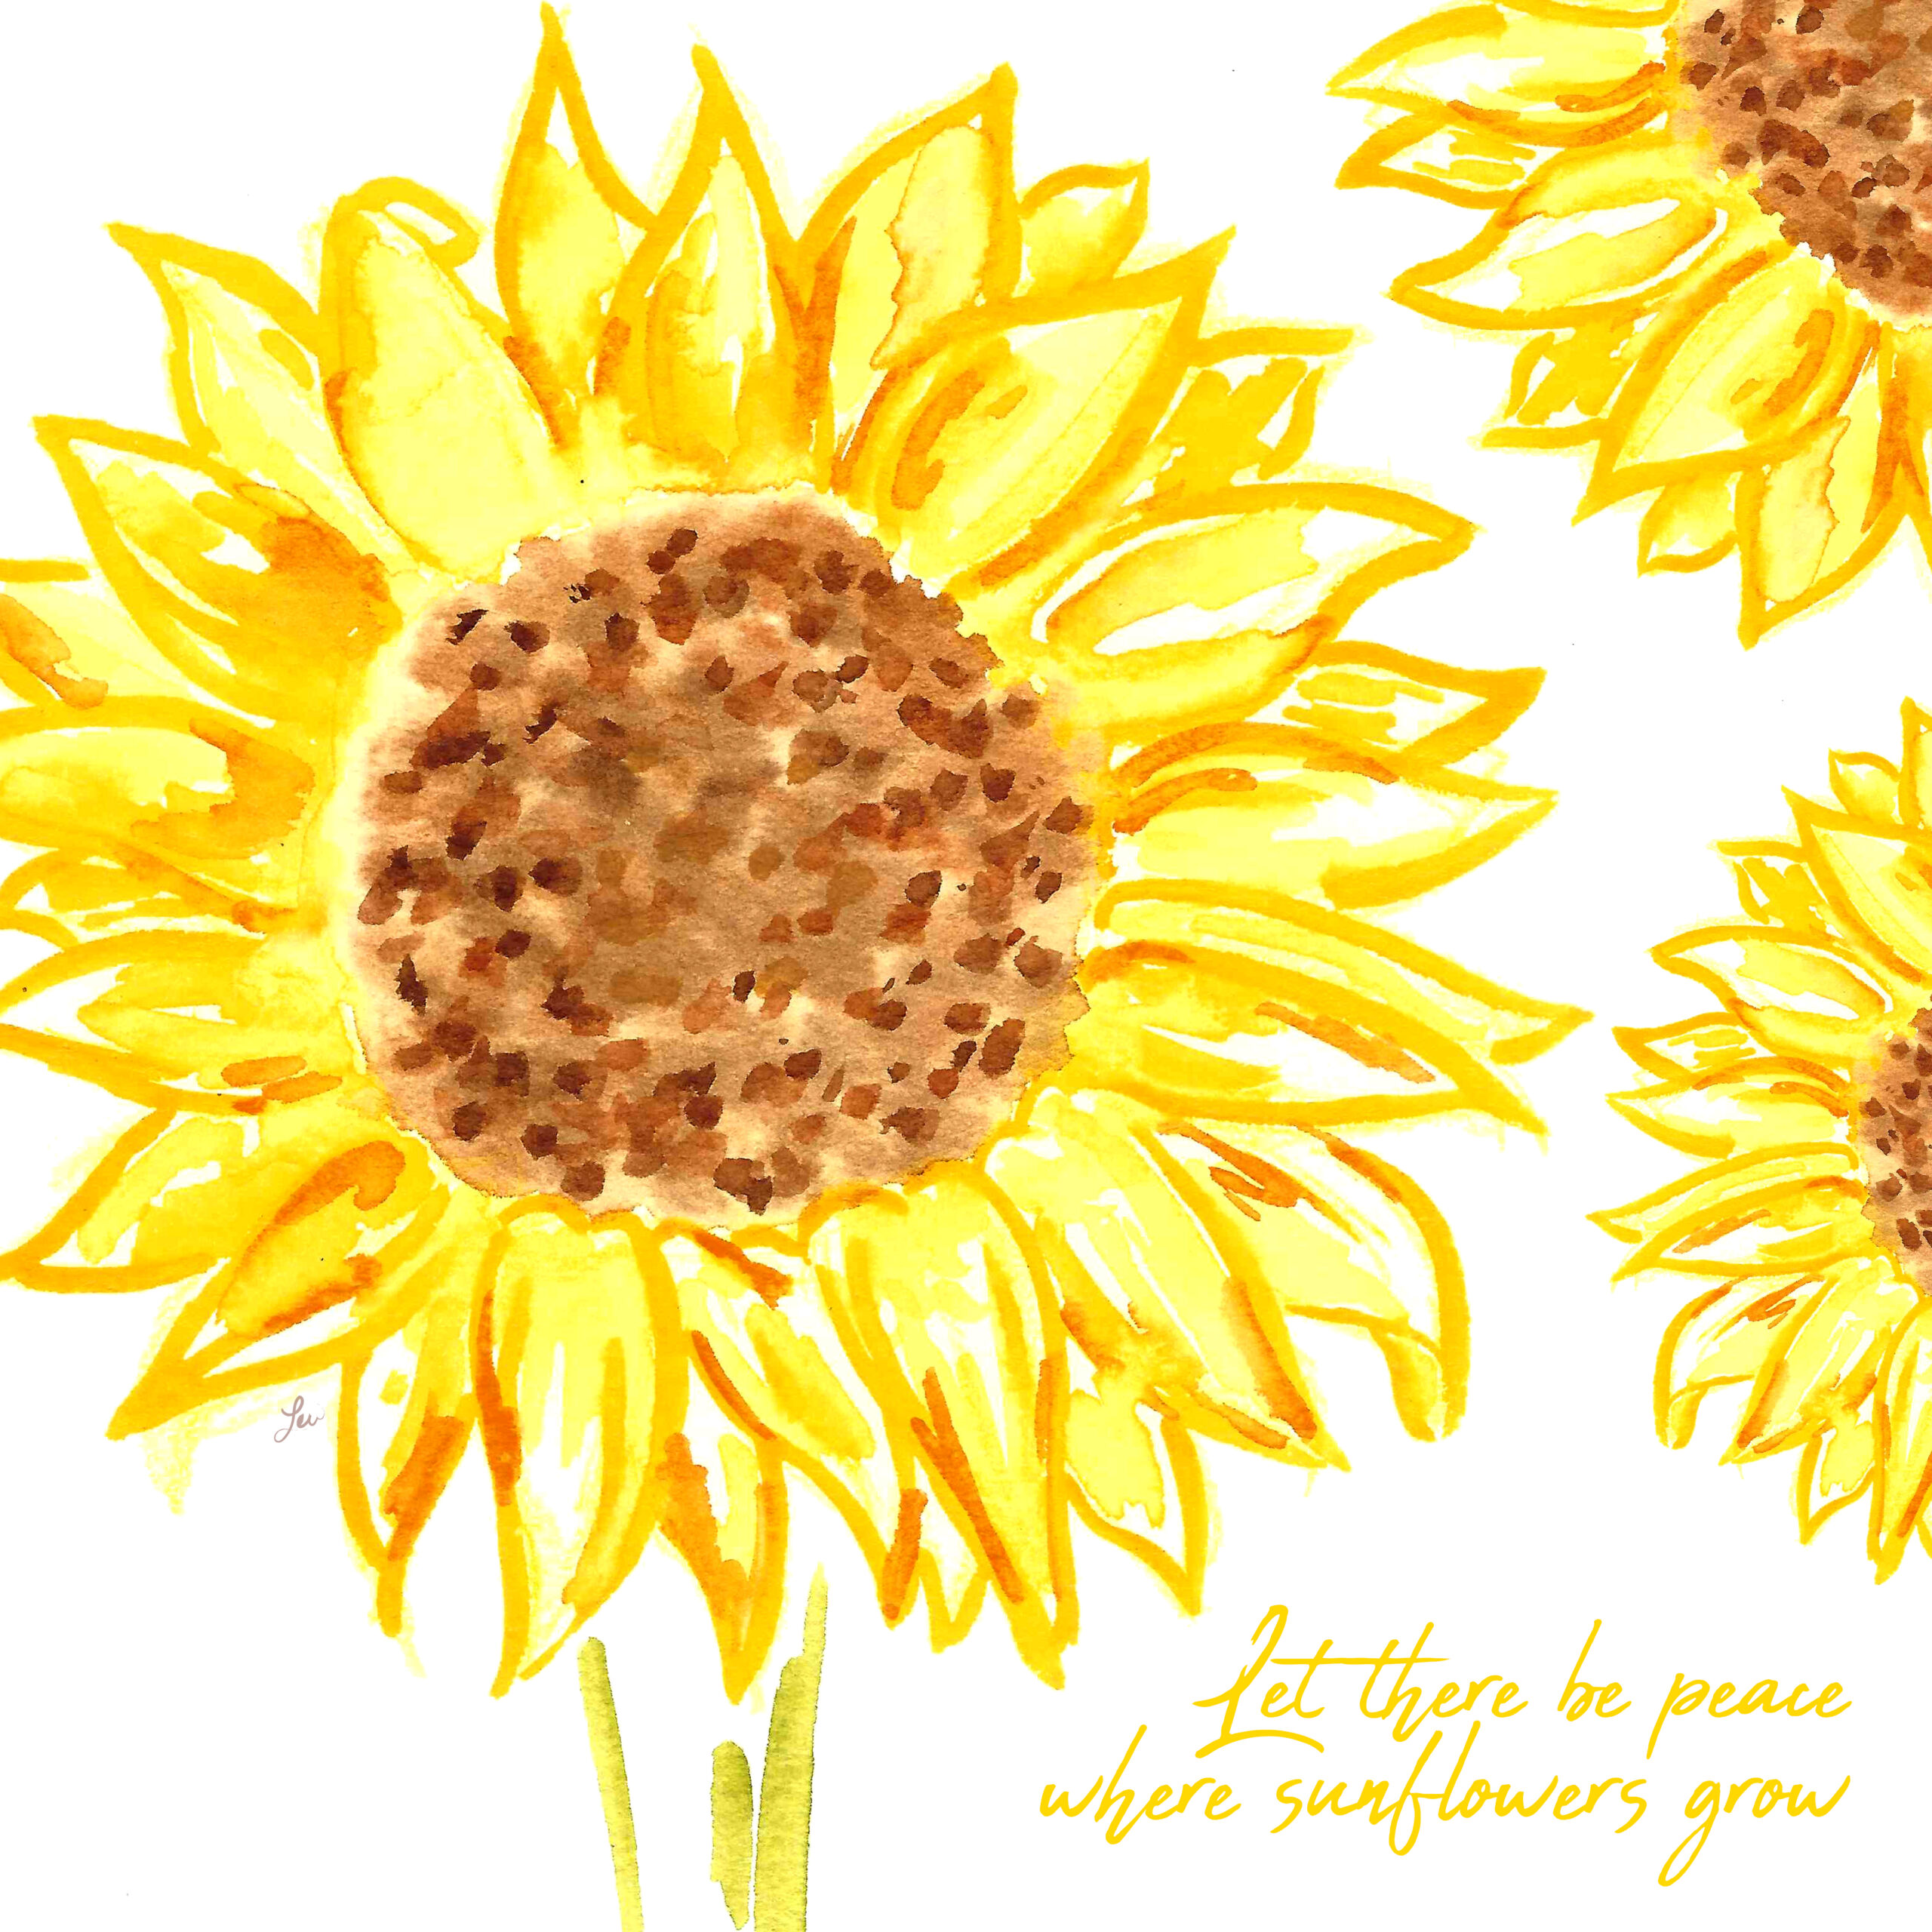 Watercolor painting of 3 yellow sunflowers with the phrase "Let there be peace where sunflowers grow."